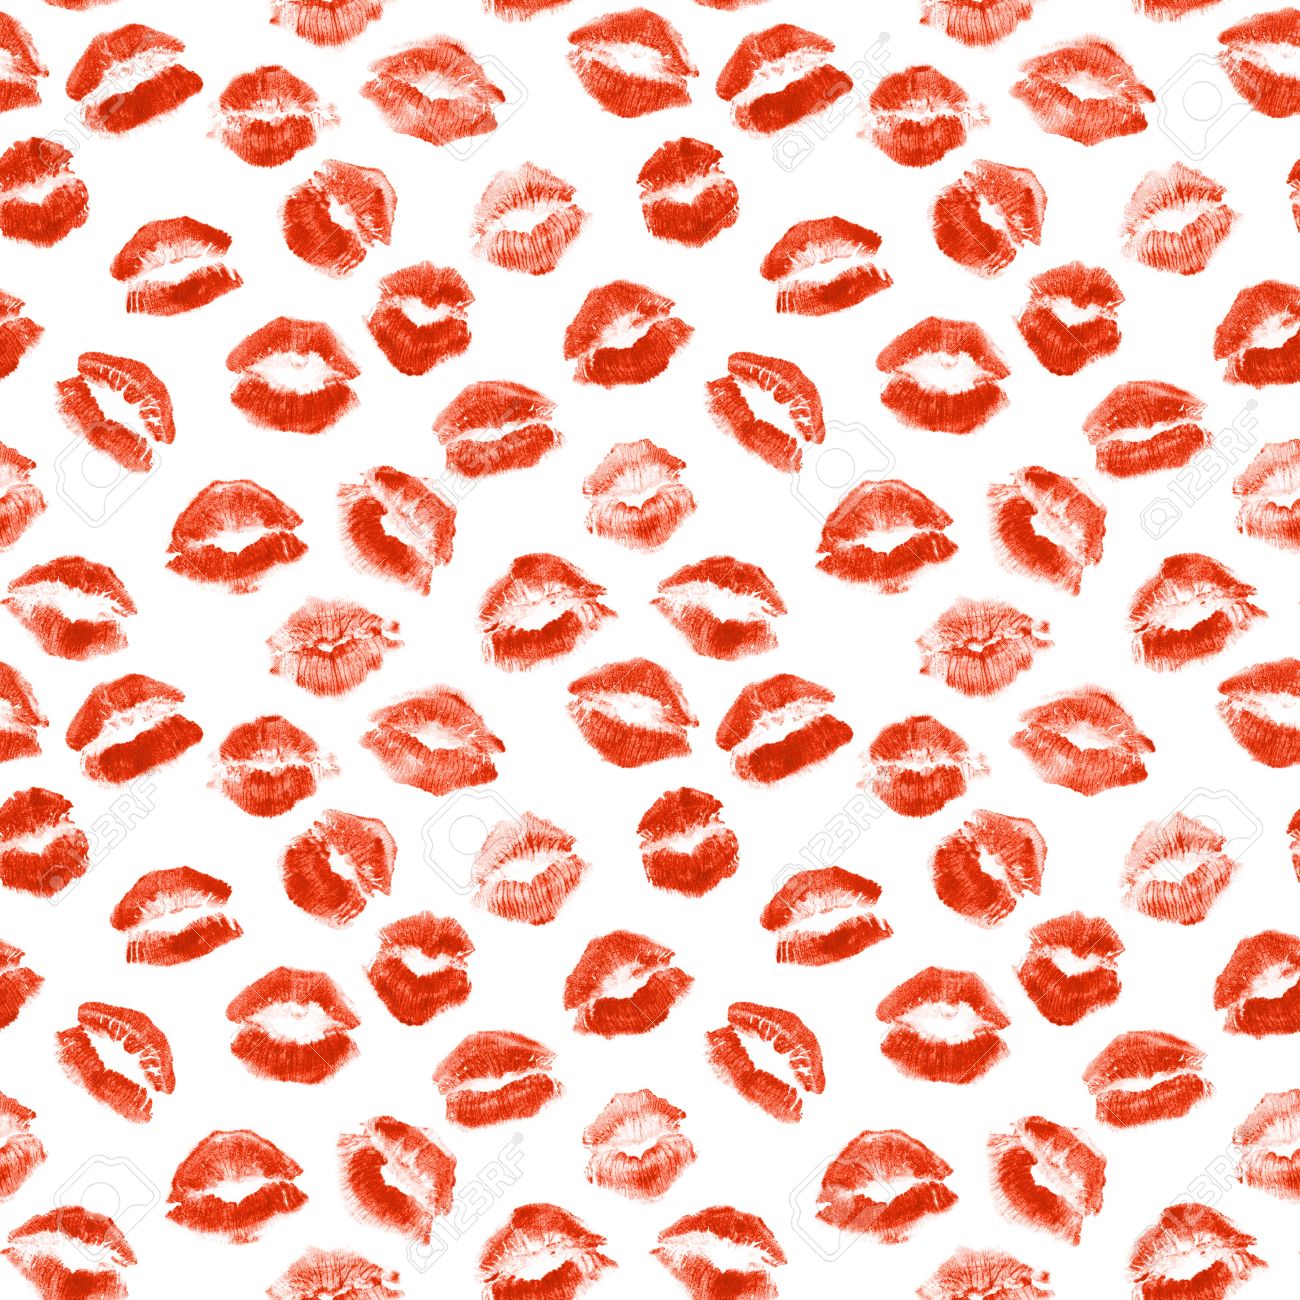 Free download Lipstick Kiss Isolated On White Background Set Stock ...